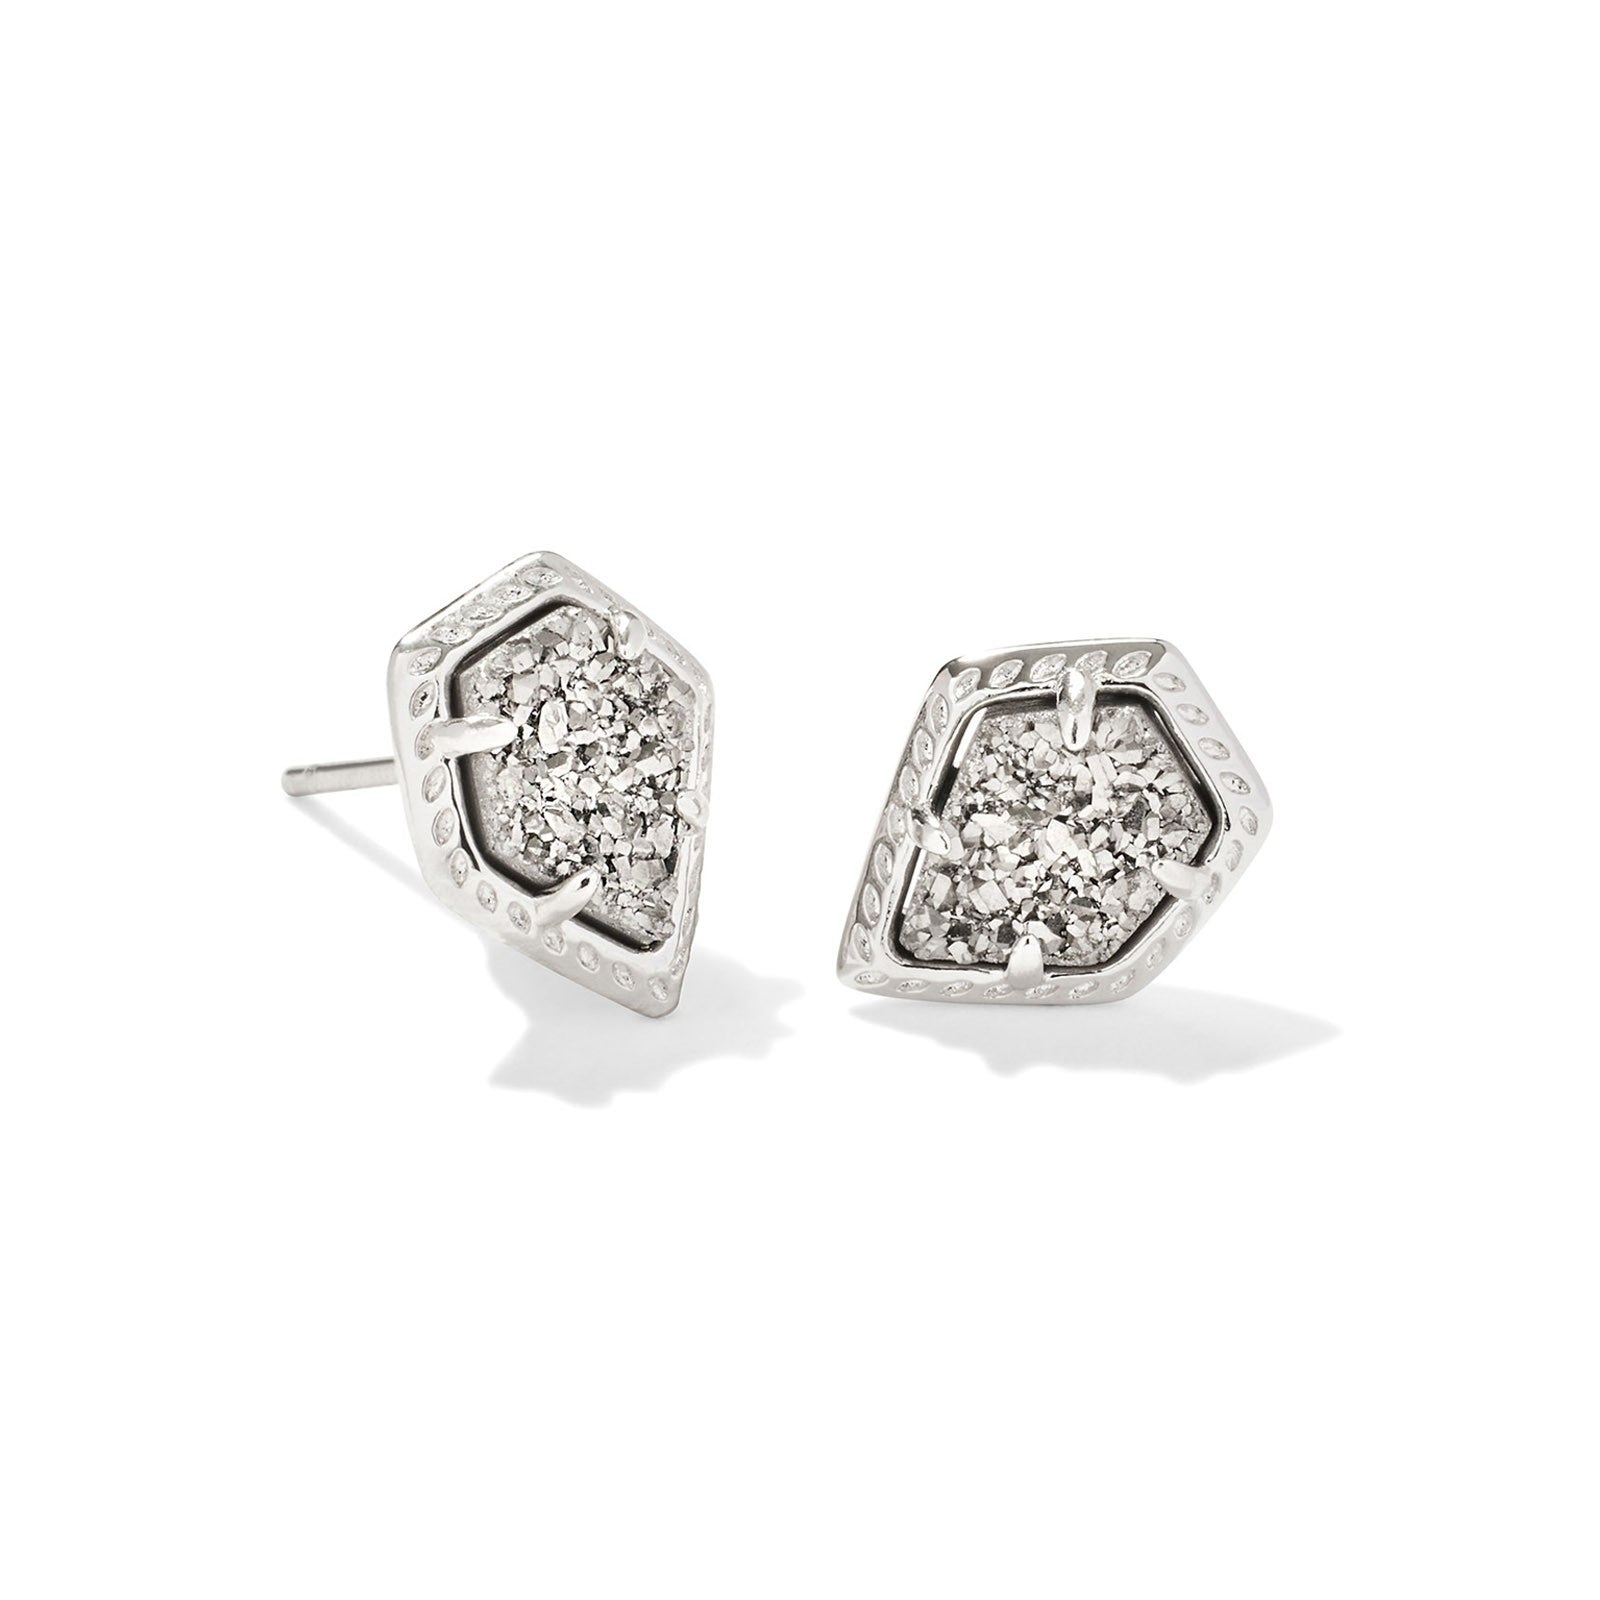 Kendra Scott | Framed Tessa Silver Stud Earrings in Platinum Drusy - Giddy Up Glamour Boutique